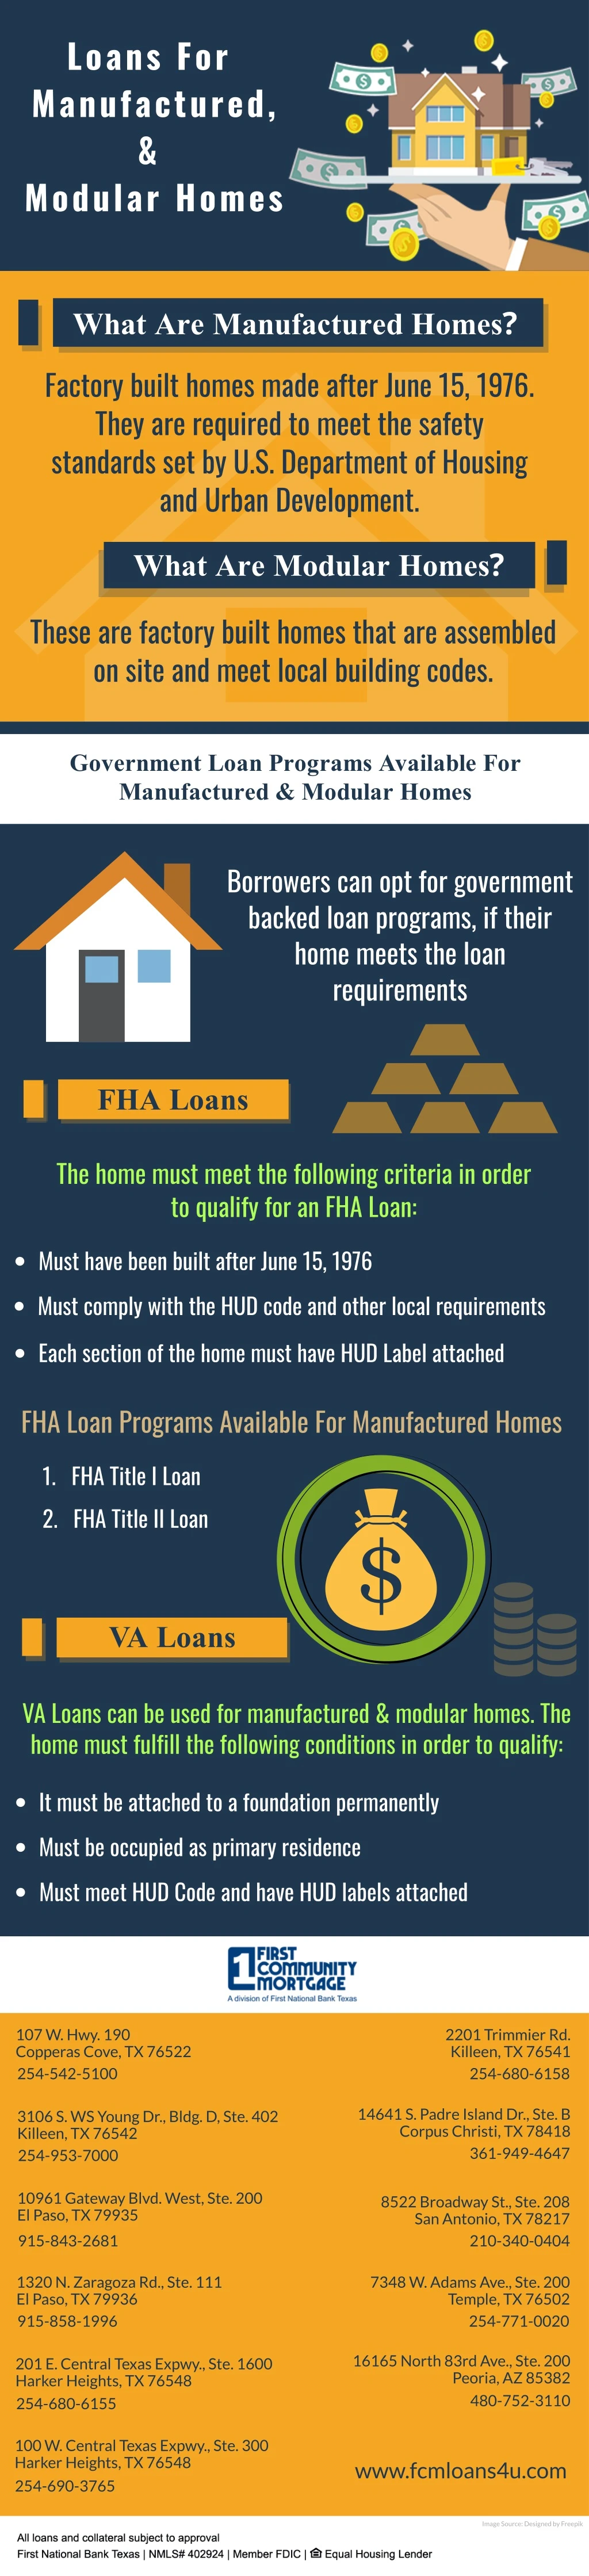 loan s for manufactured modular homes